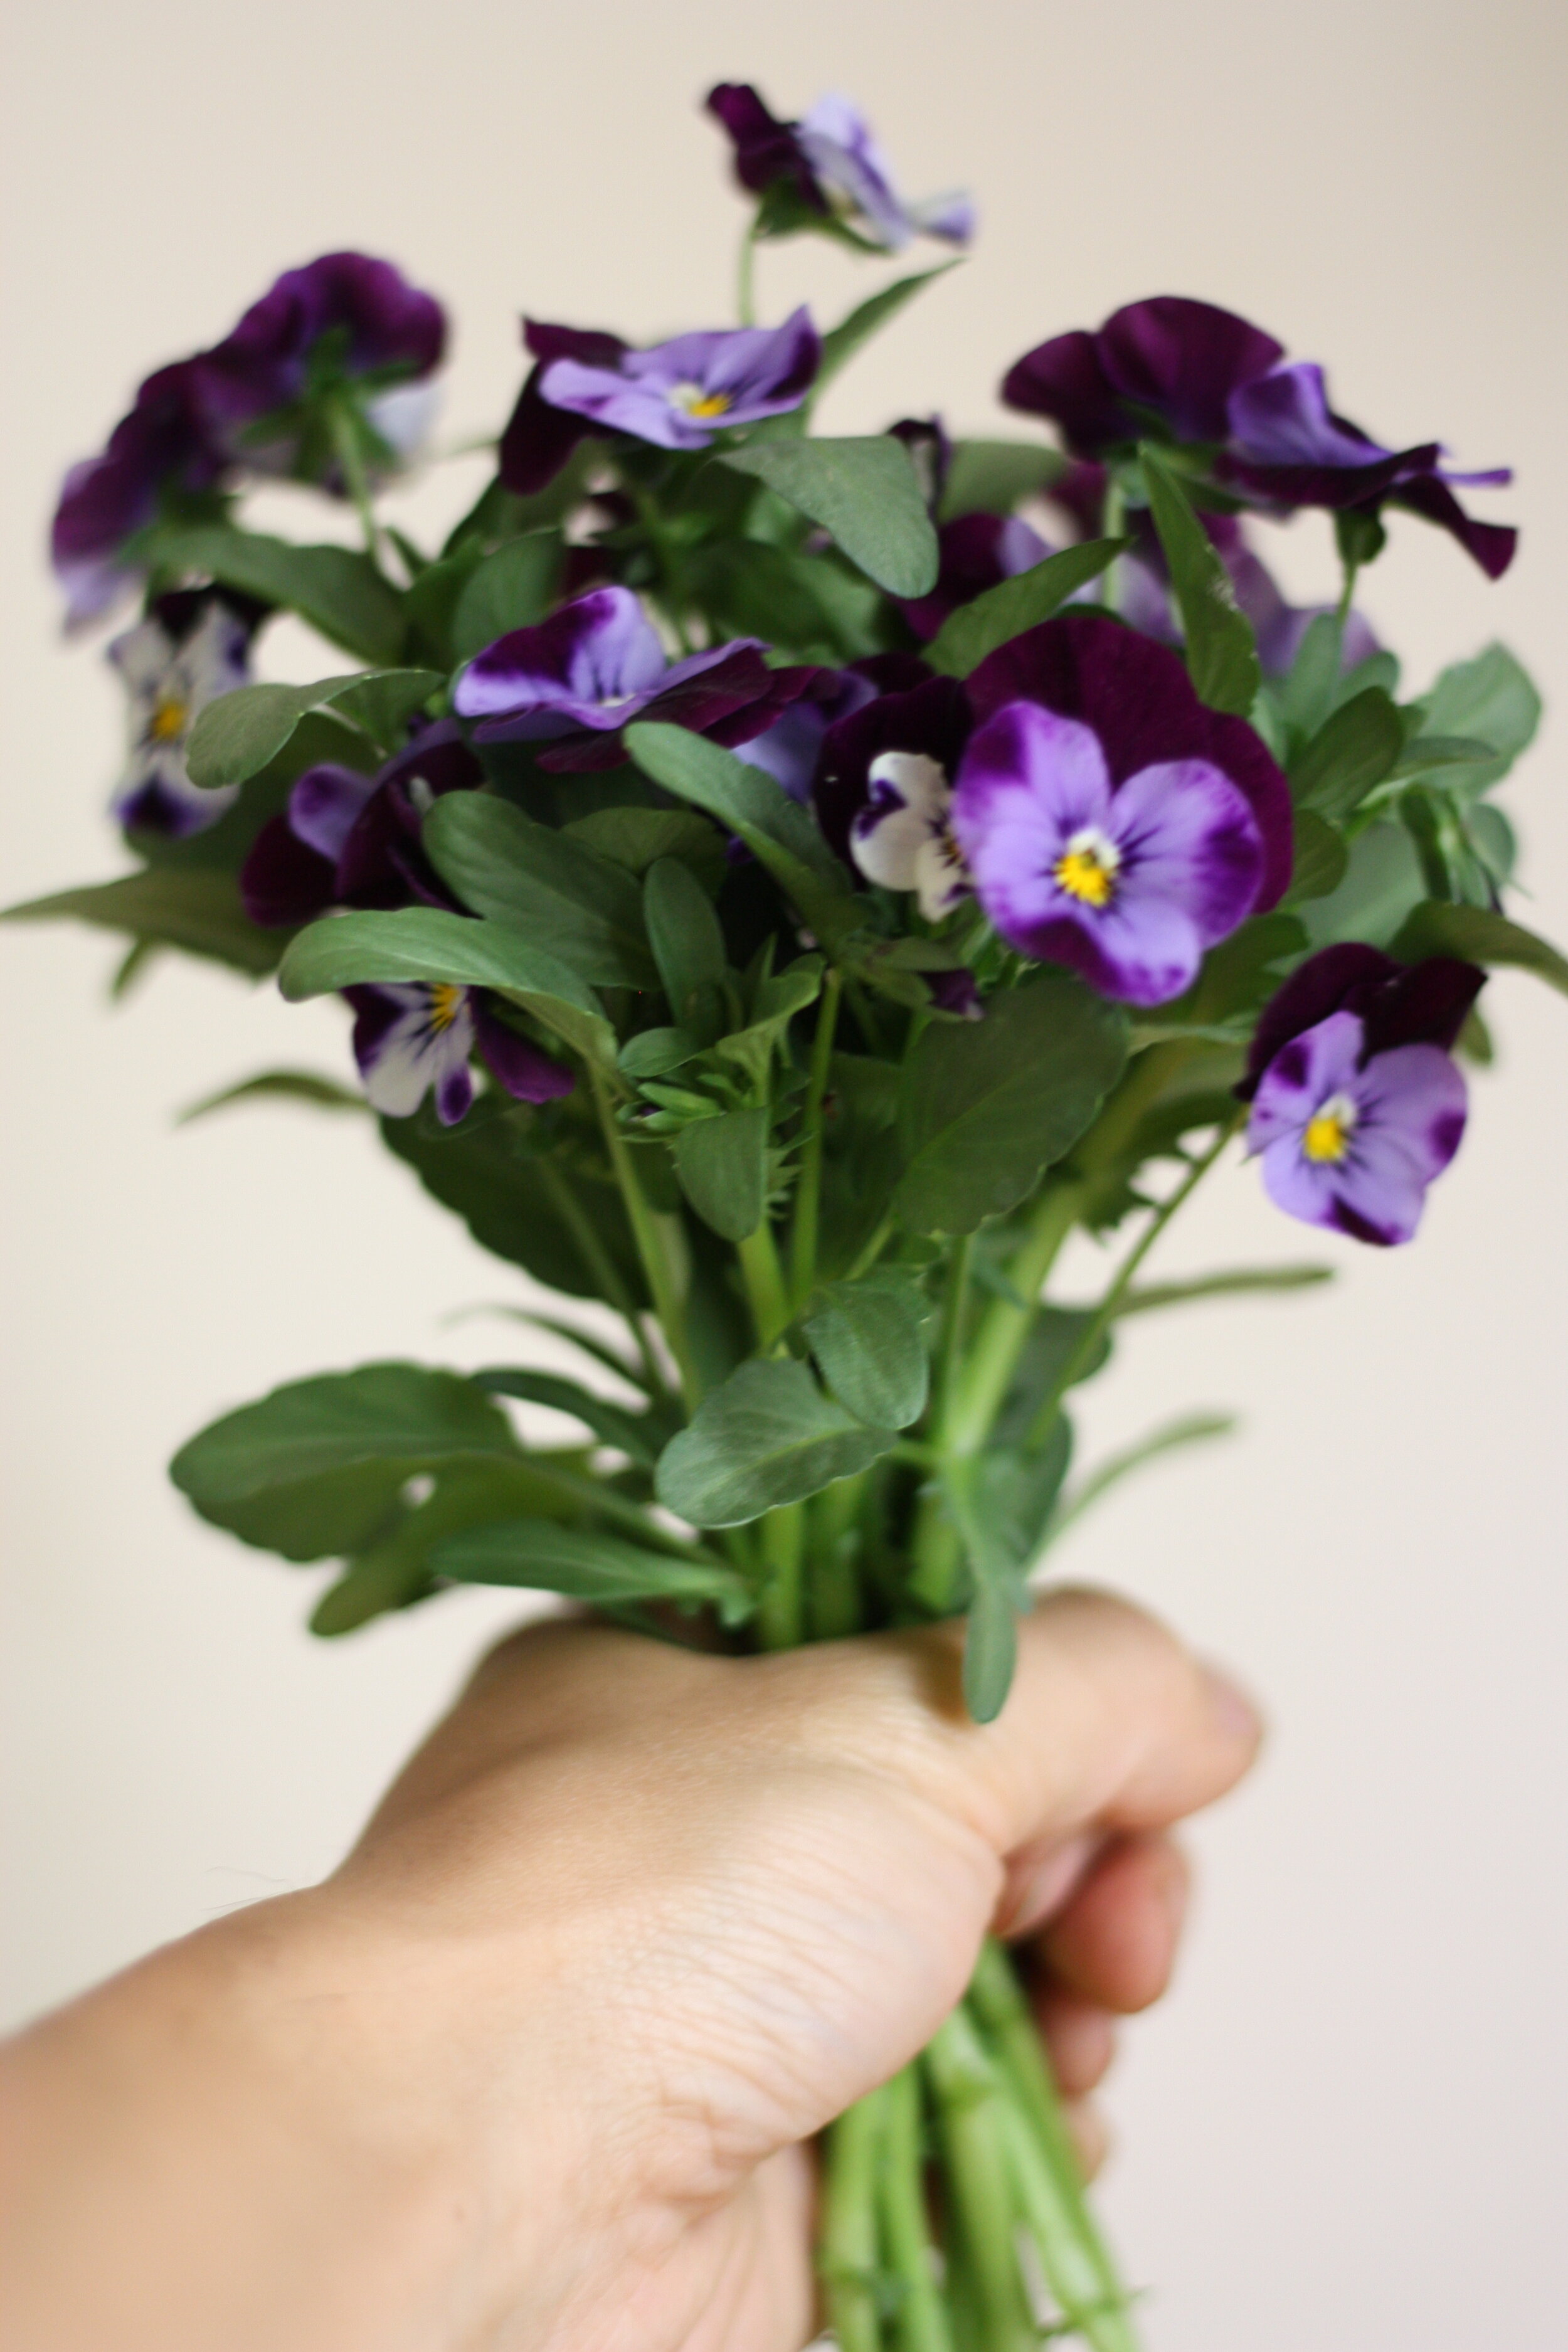 growing violas and pansies for the flower farmer — the kokoro garden